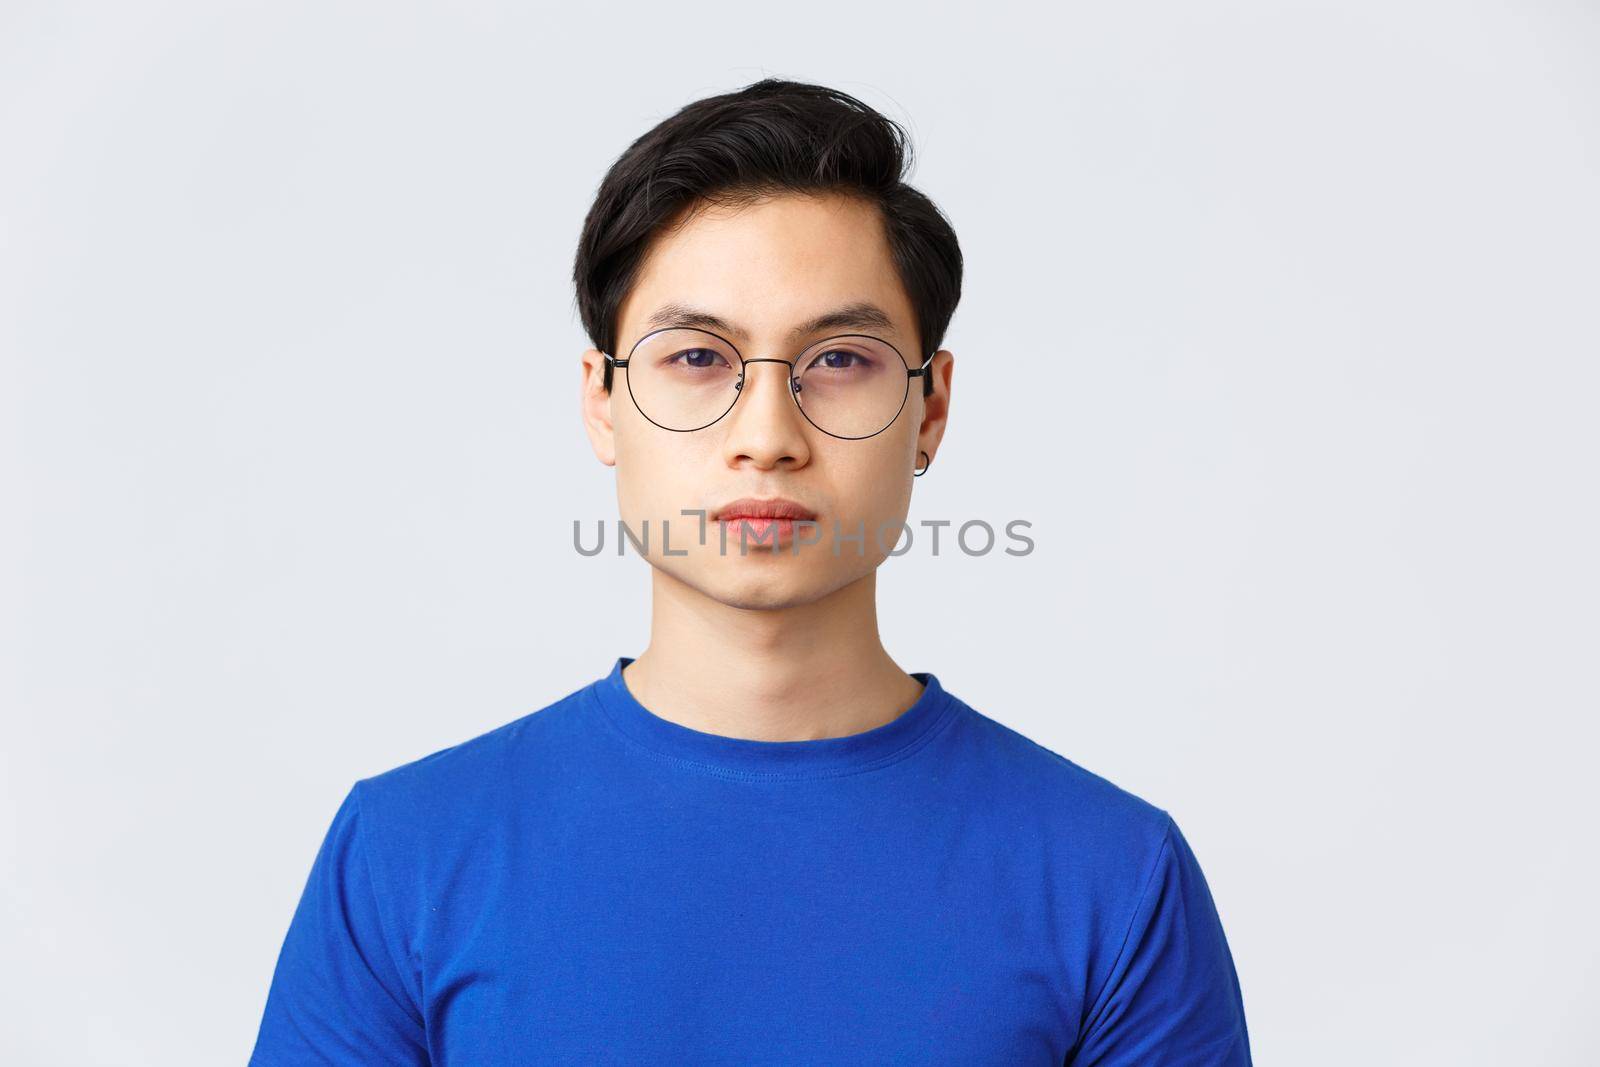 Lifestyle, people emotions and beauty concept. Close-up of asian man in glasses with stylish haircut looking at camera with normal, calm expression, standing grey background.